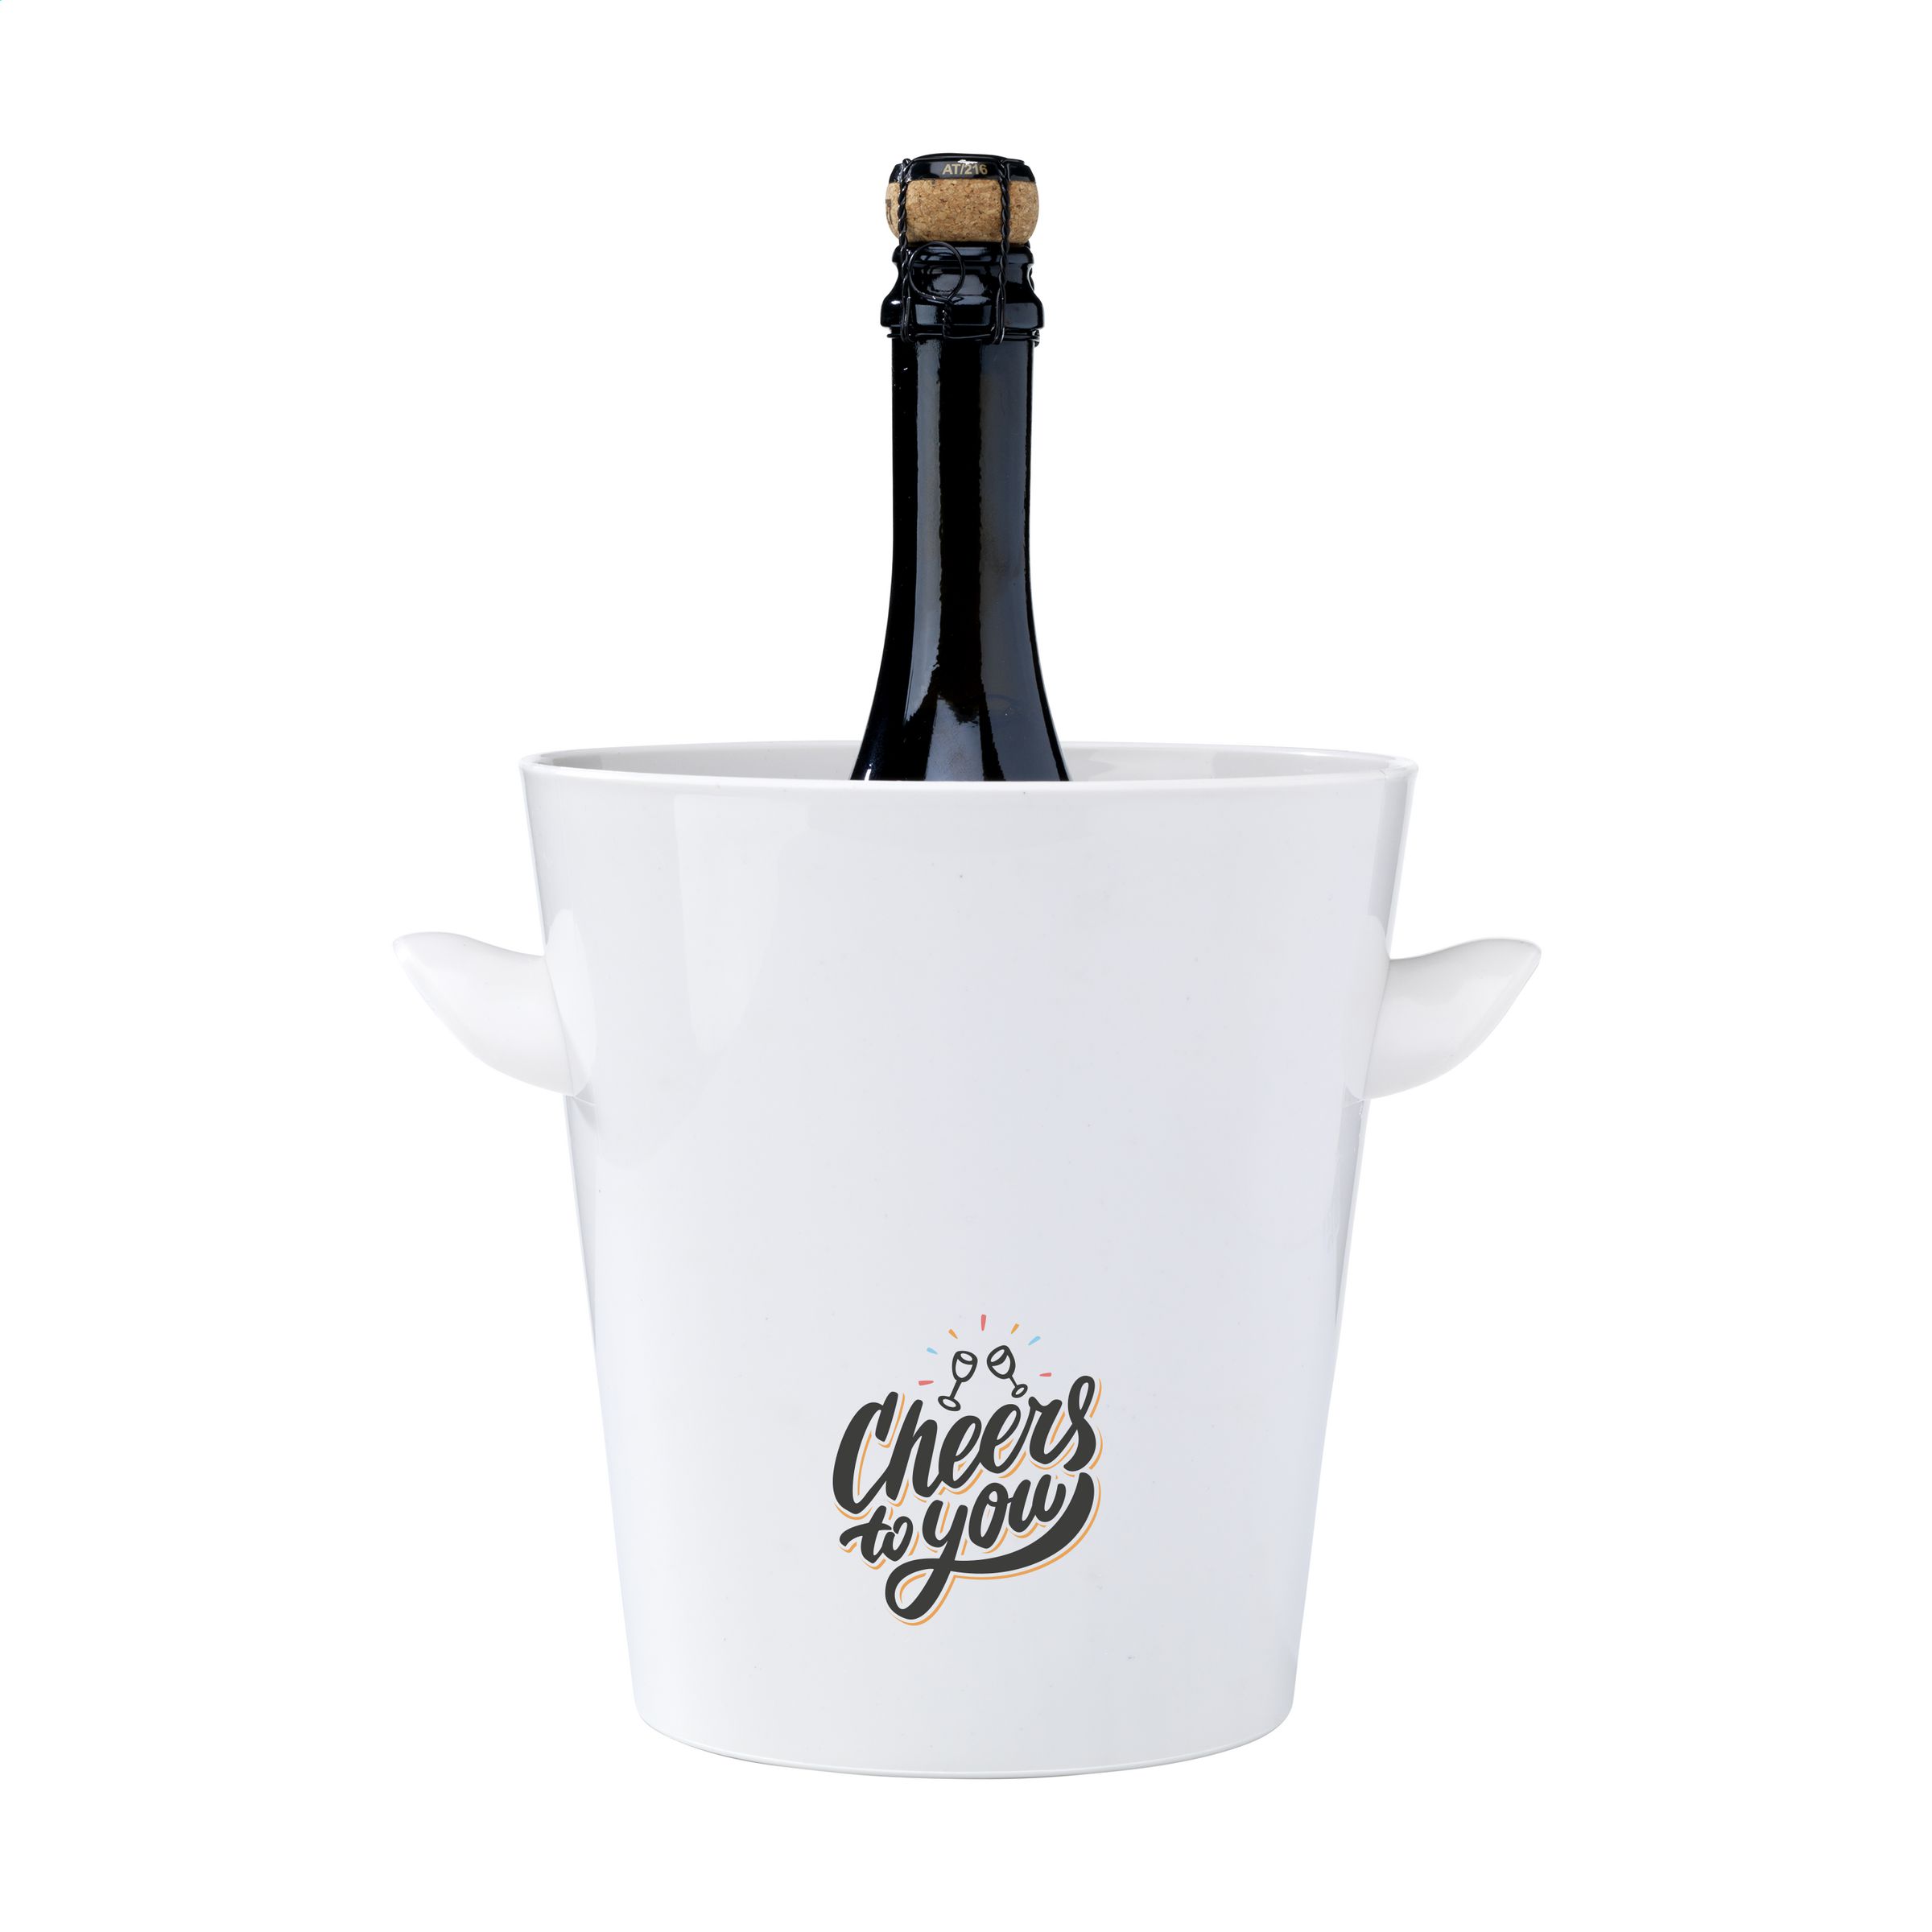 Branded Ice Bucket With Champagne Bottle